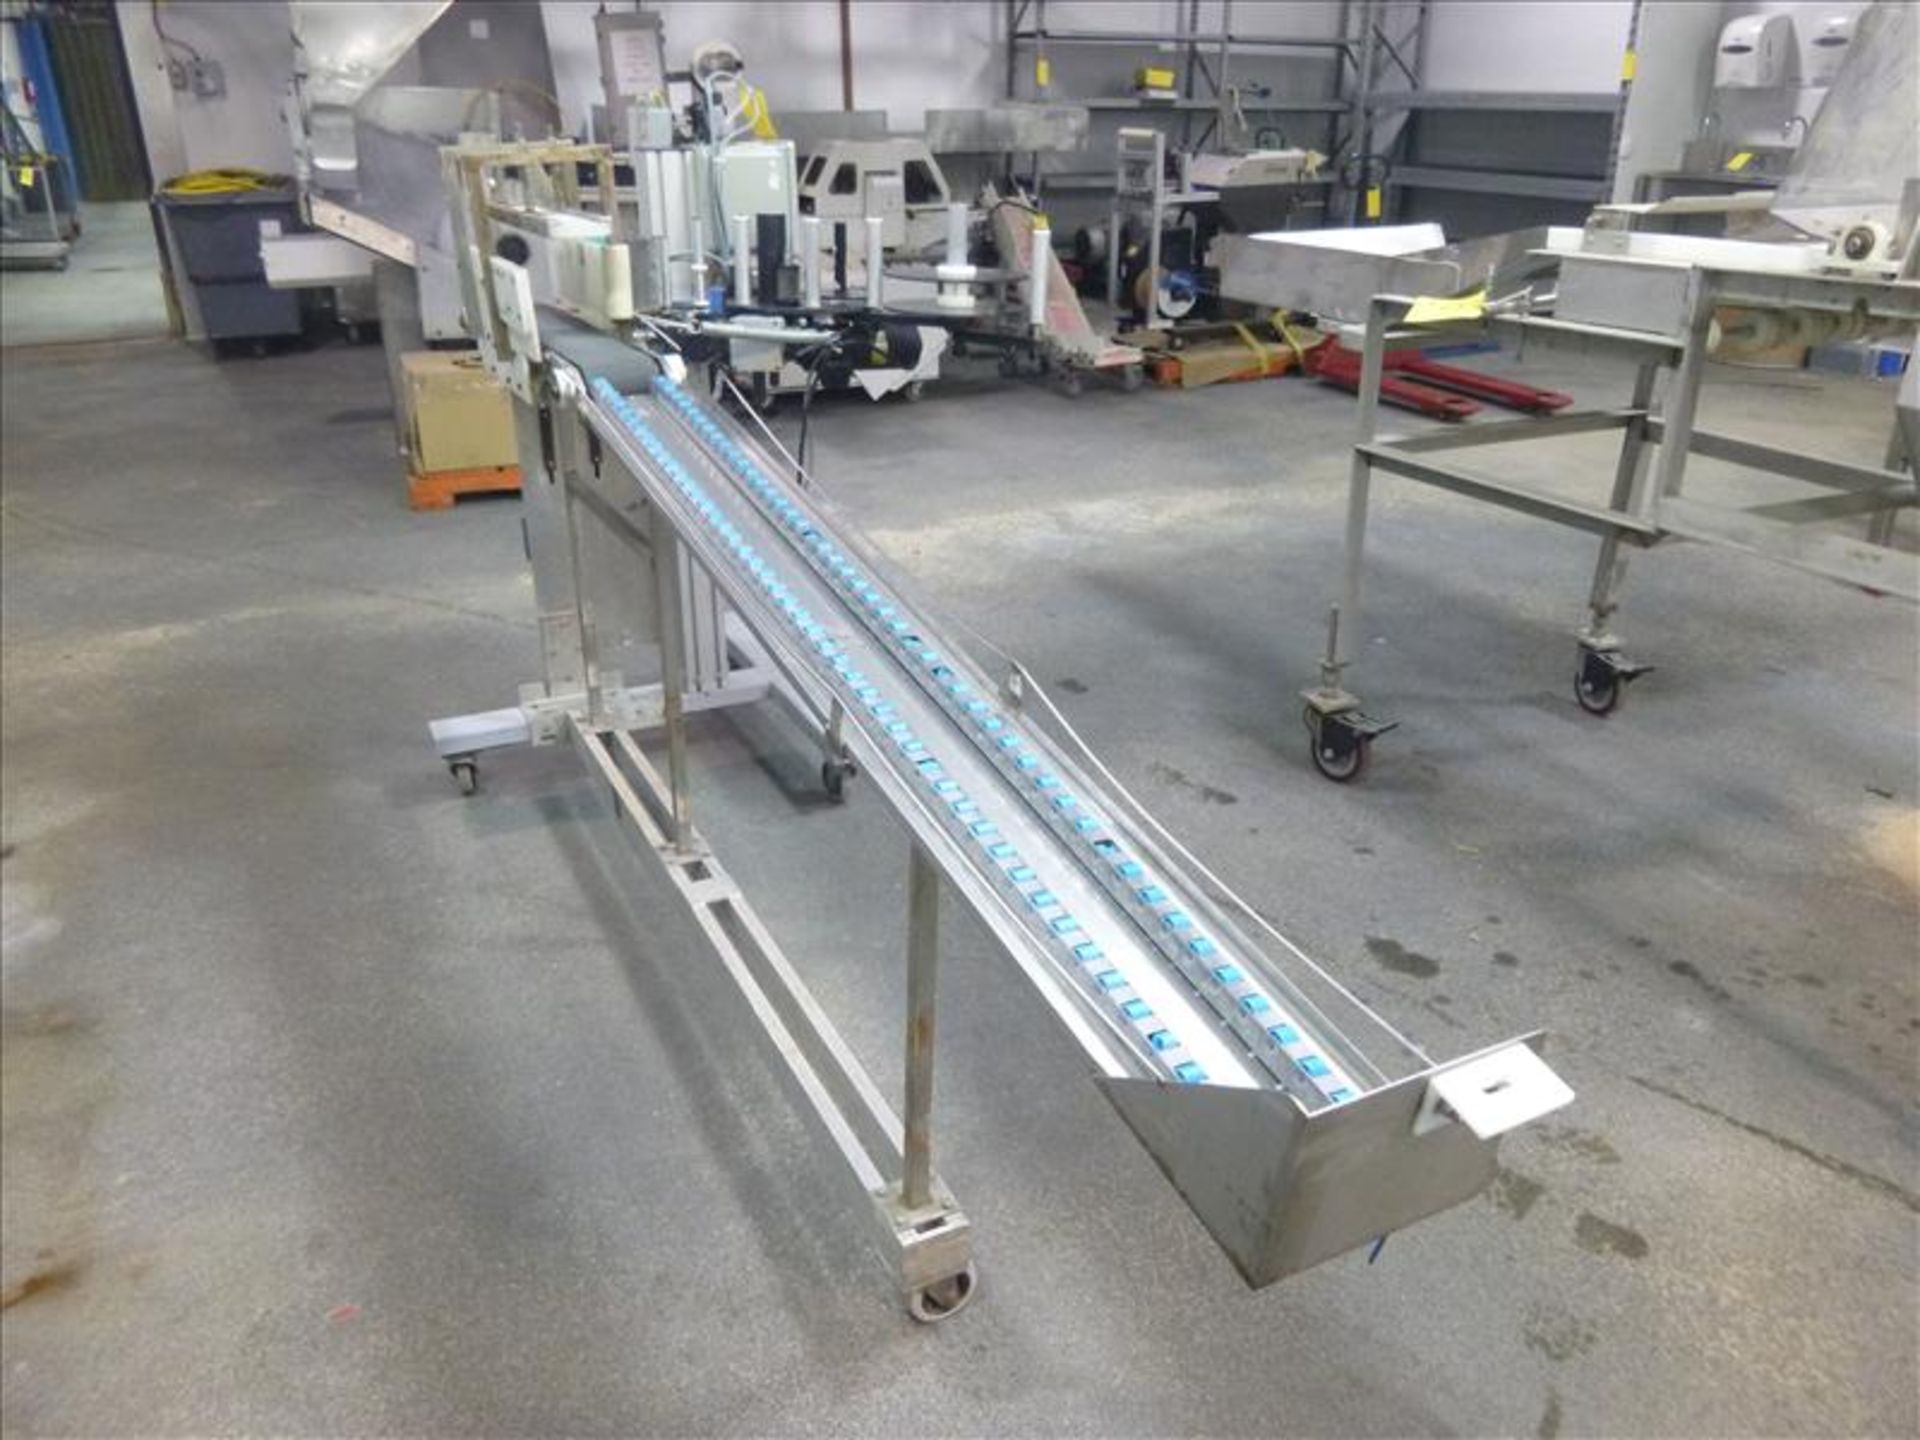 Carlisle Label Applicator mod. UT-2C on casters c/w 4.5 in. x 40 in. conveyor & 72 in. roll-off - Image 4 of 4